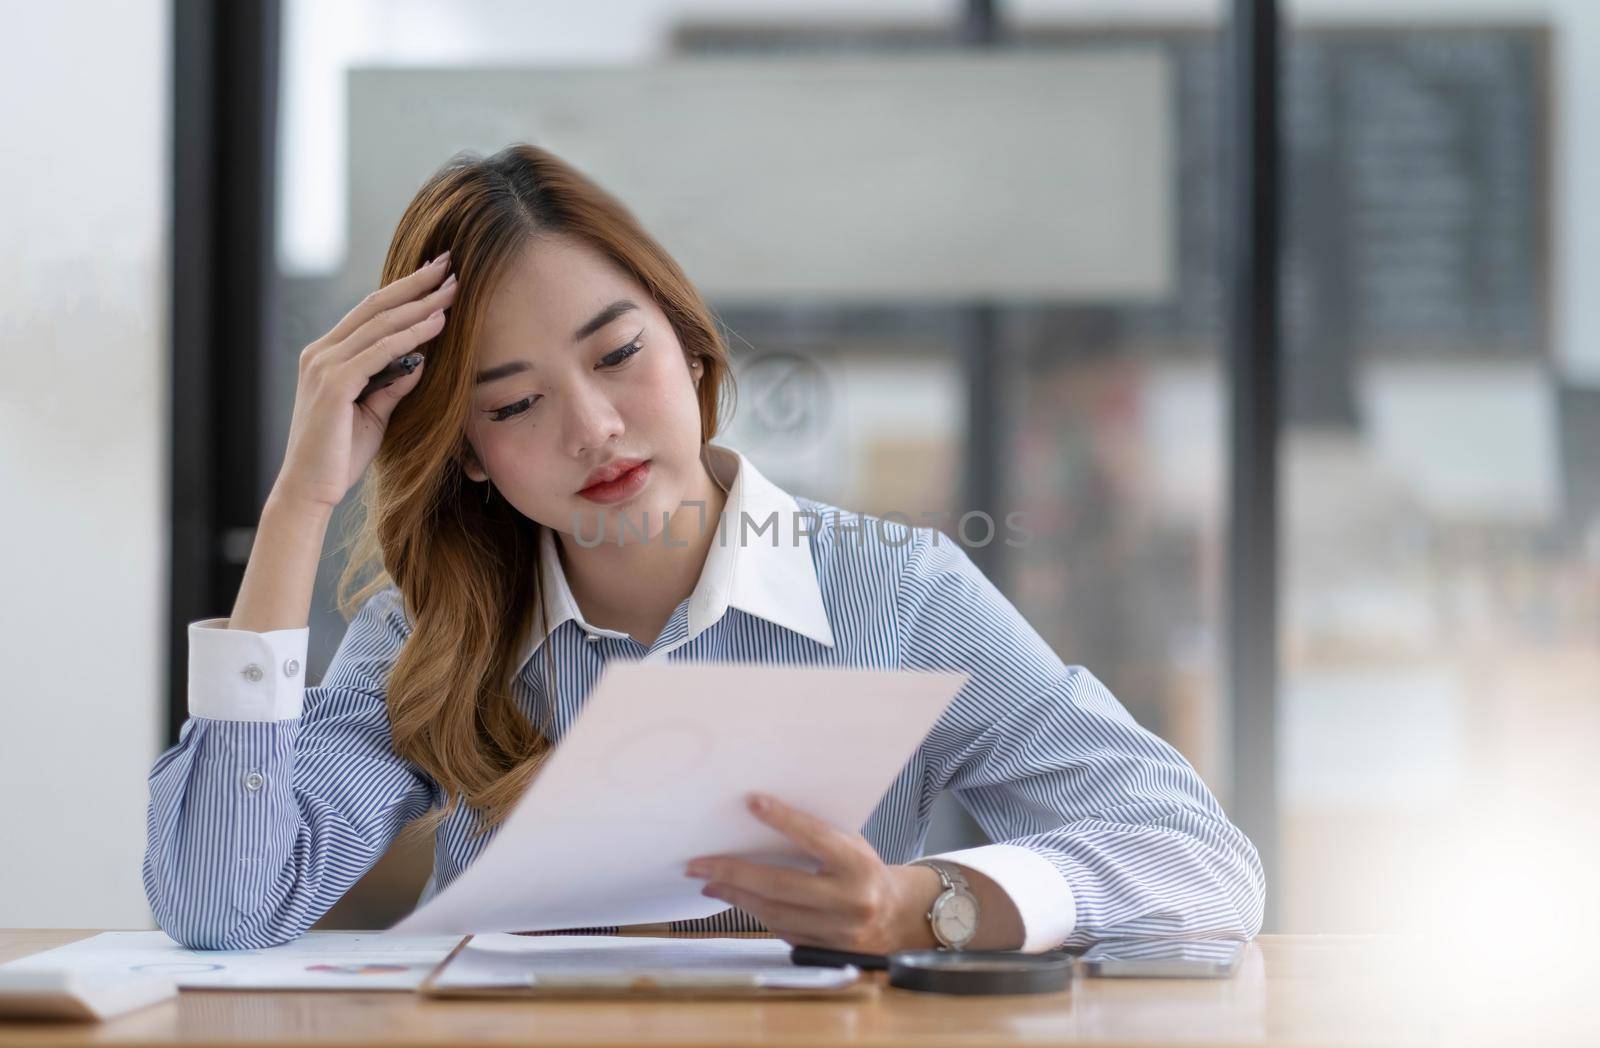 Asian women are bored from their online studies, have a sad face and have been tired from their studies for a long time..